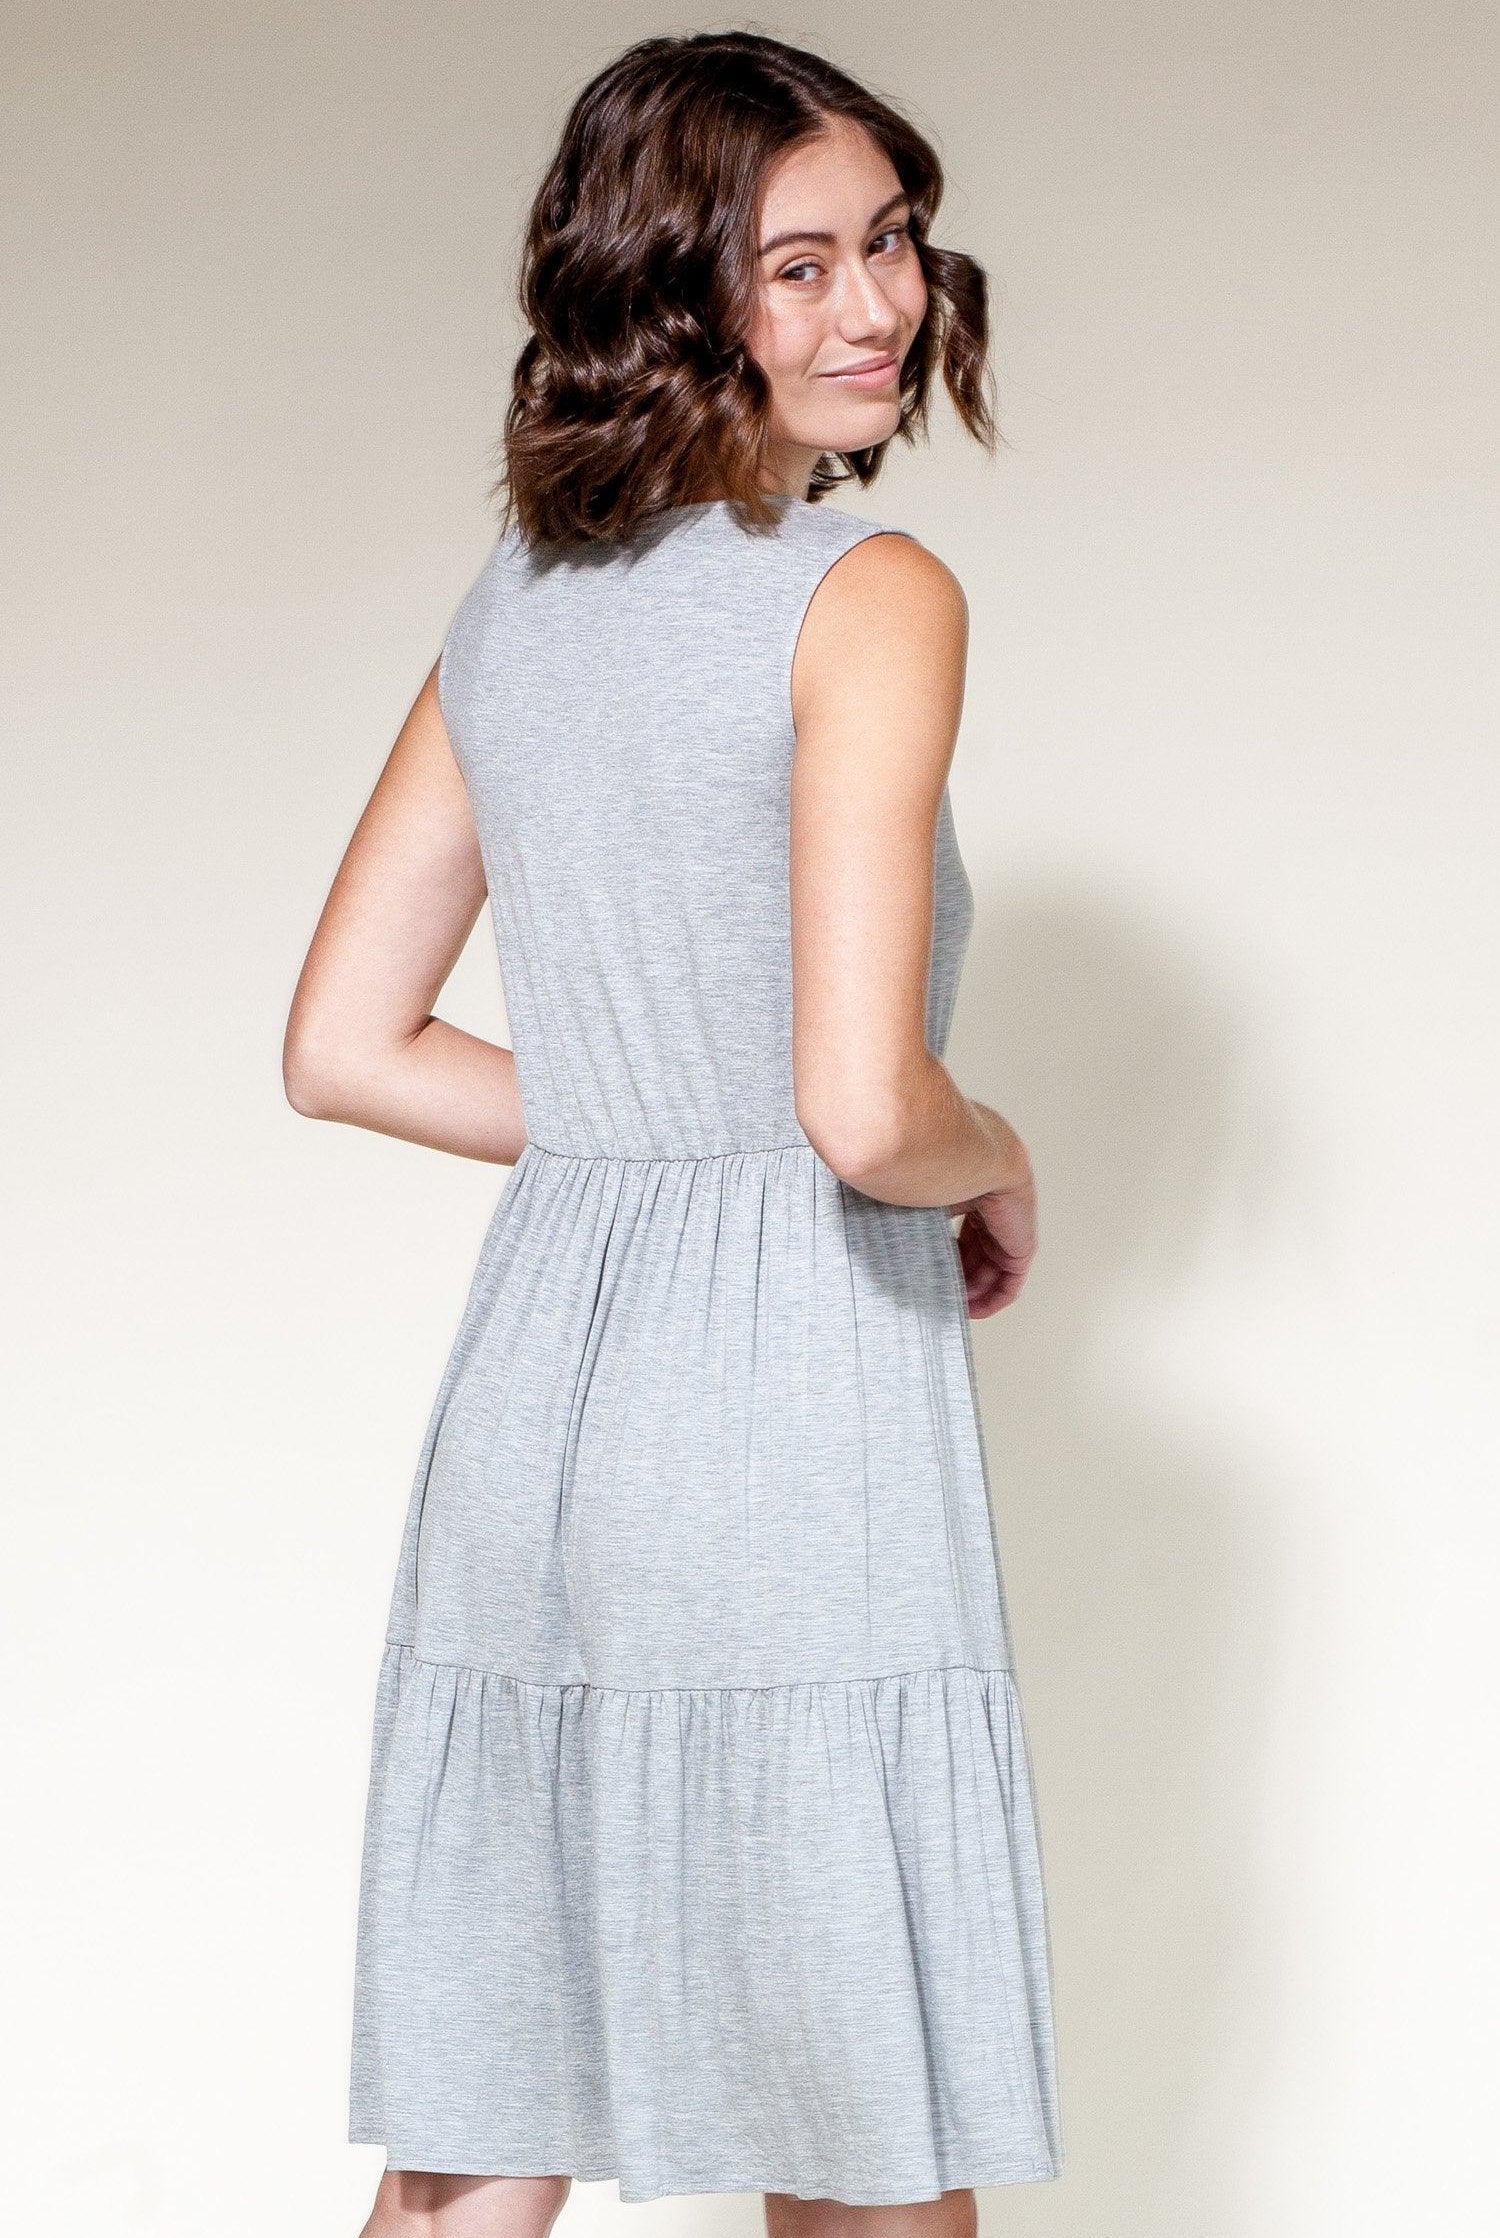 The Kyla Dress - Grey - Bunky & Marie's Boutique